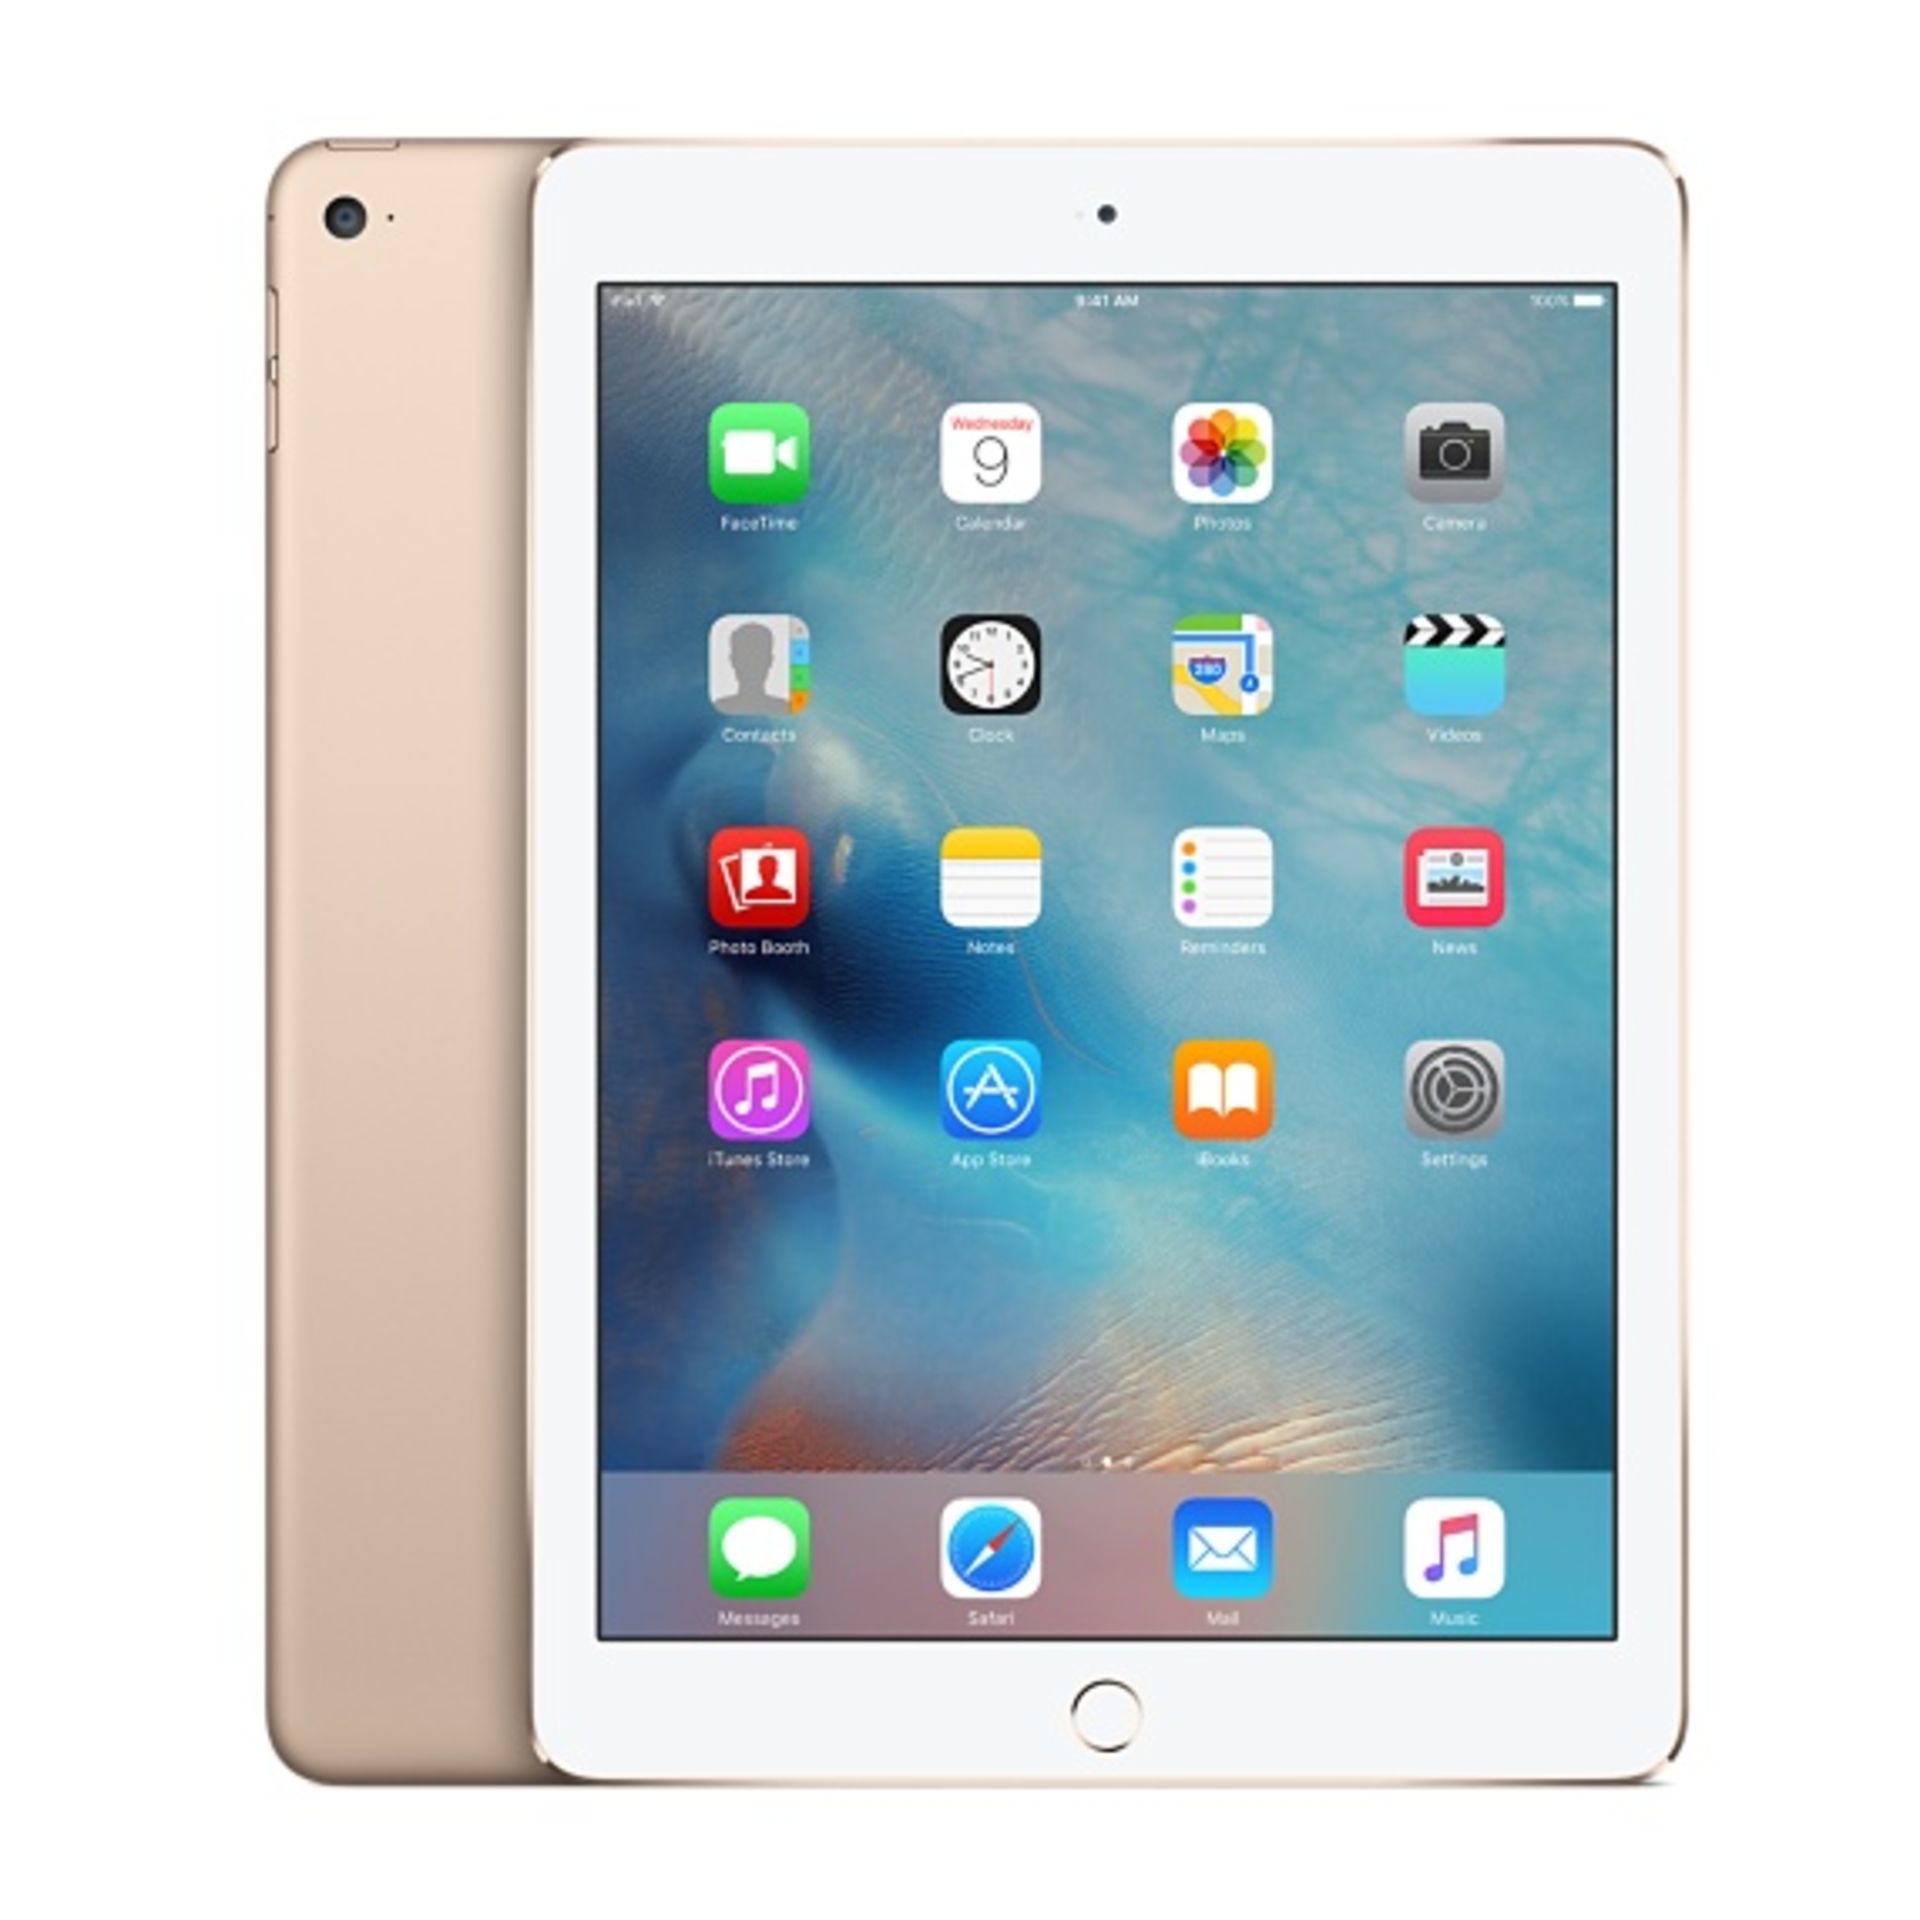 V Grade A Apple iPad Air 2 16GB Gold - Wi-Fi - Box and Accessories X 2 YOUR BID PRICE TO BE